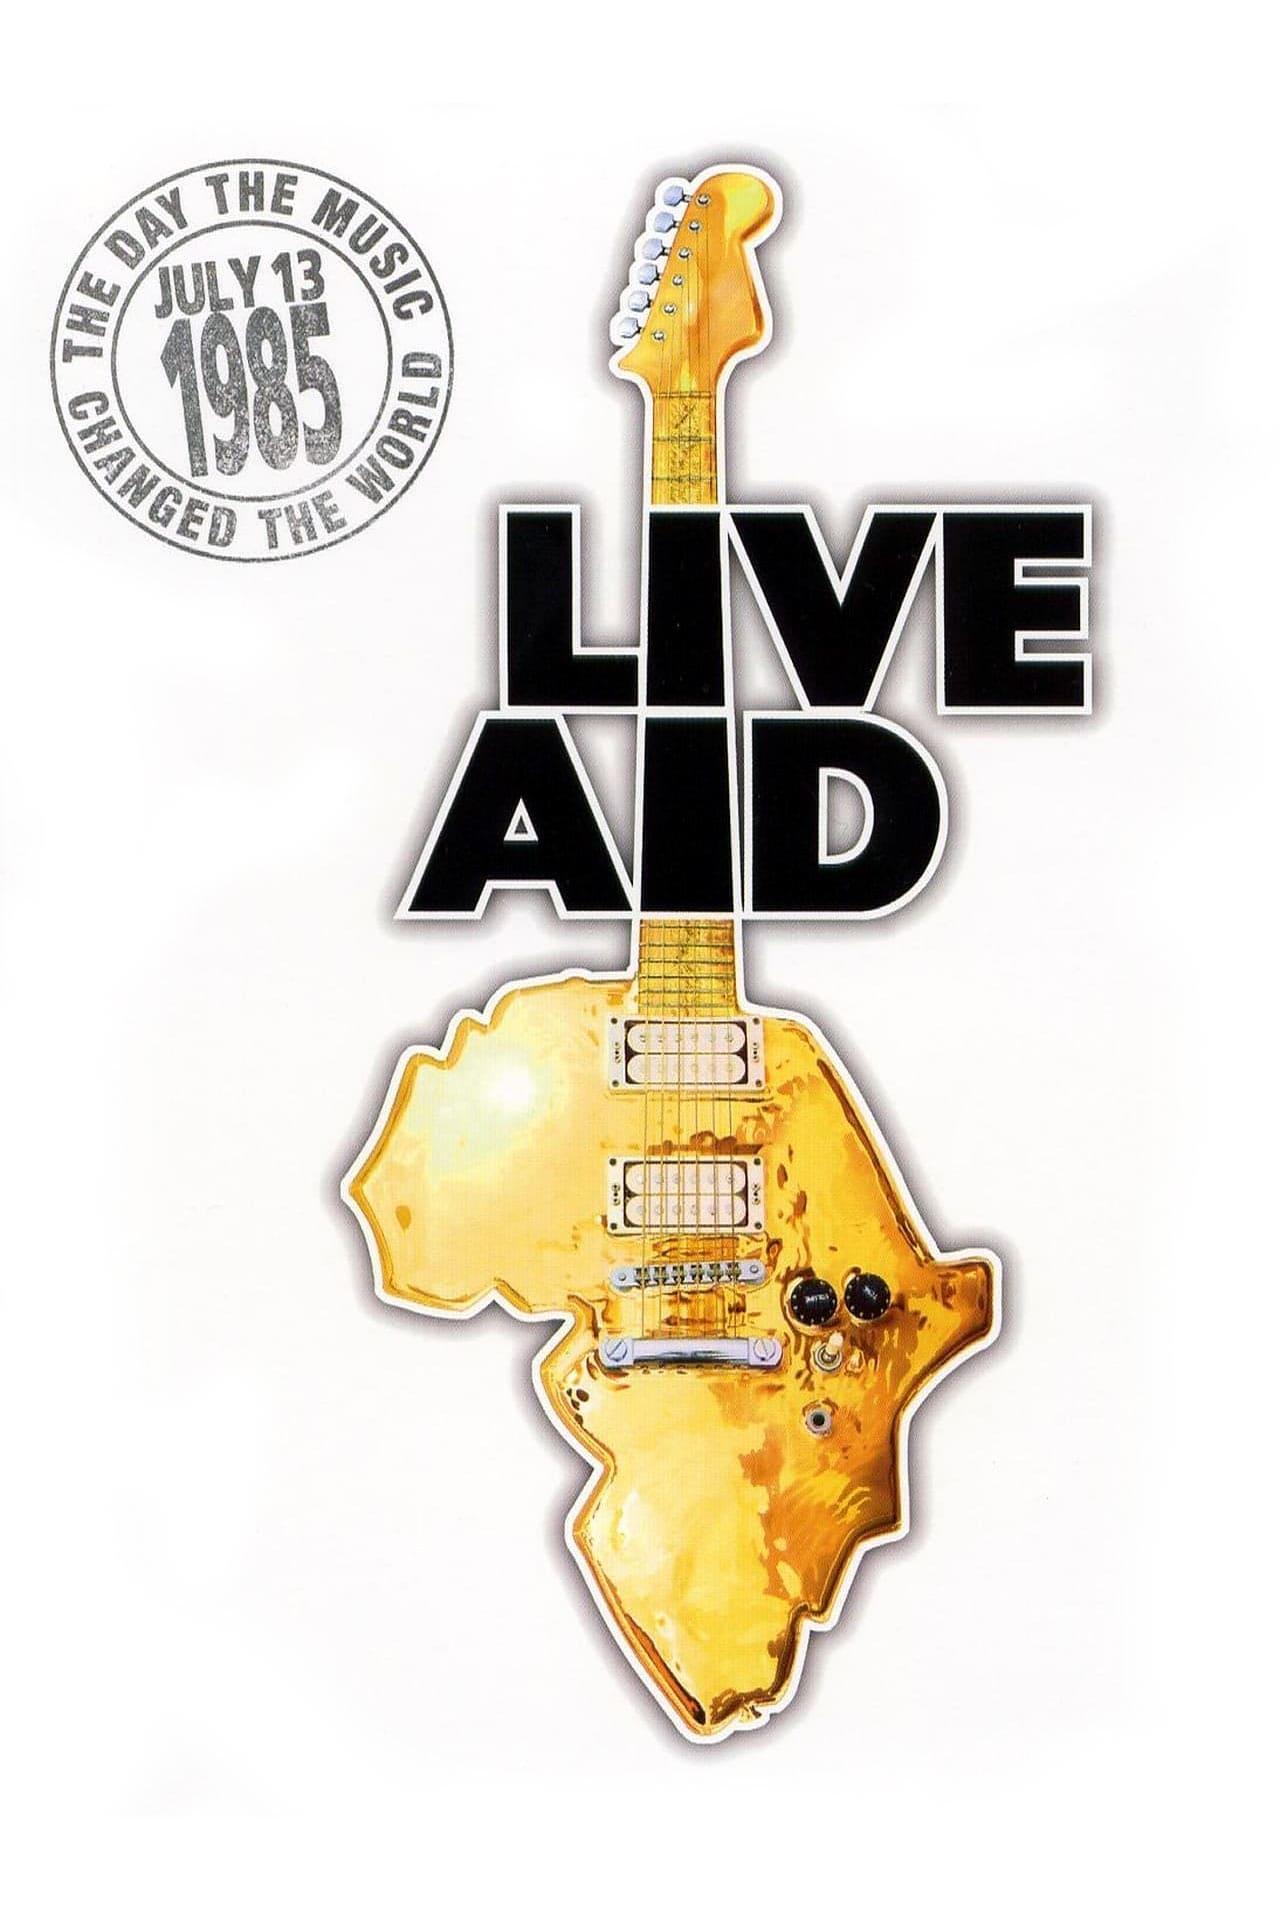 Live Aid poster